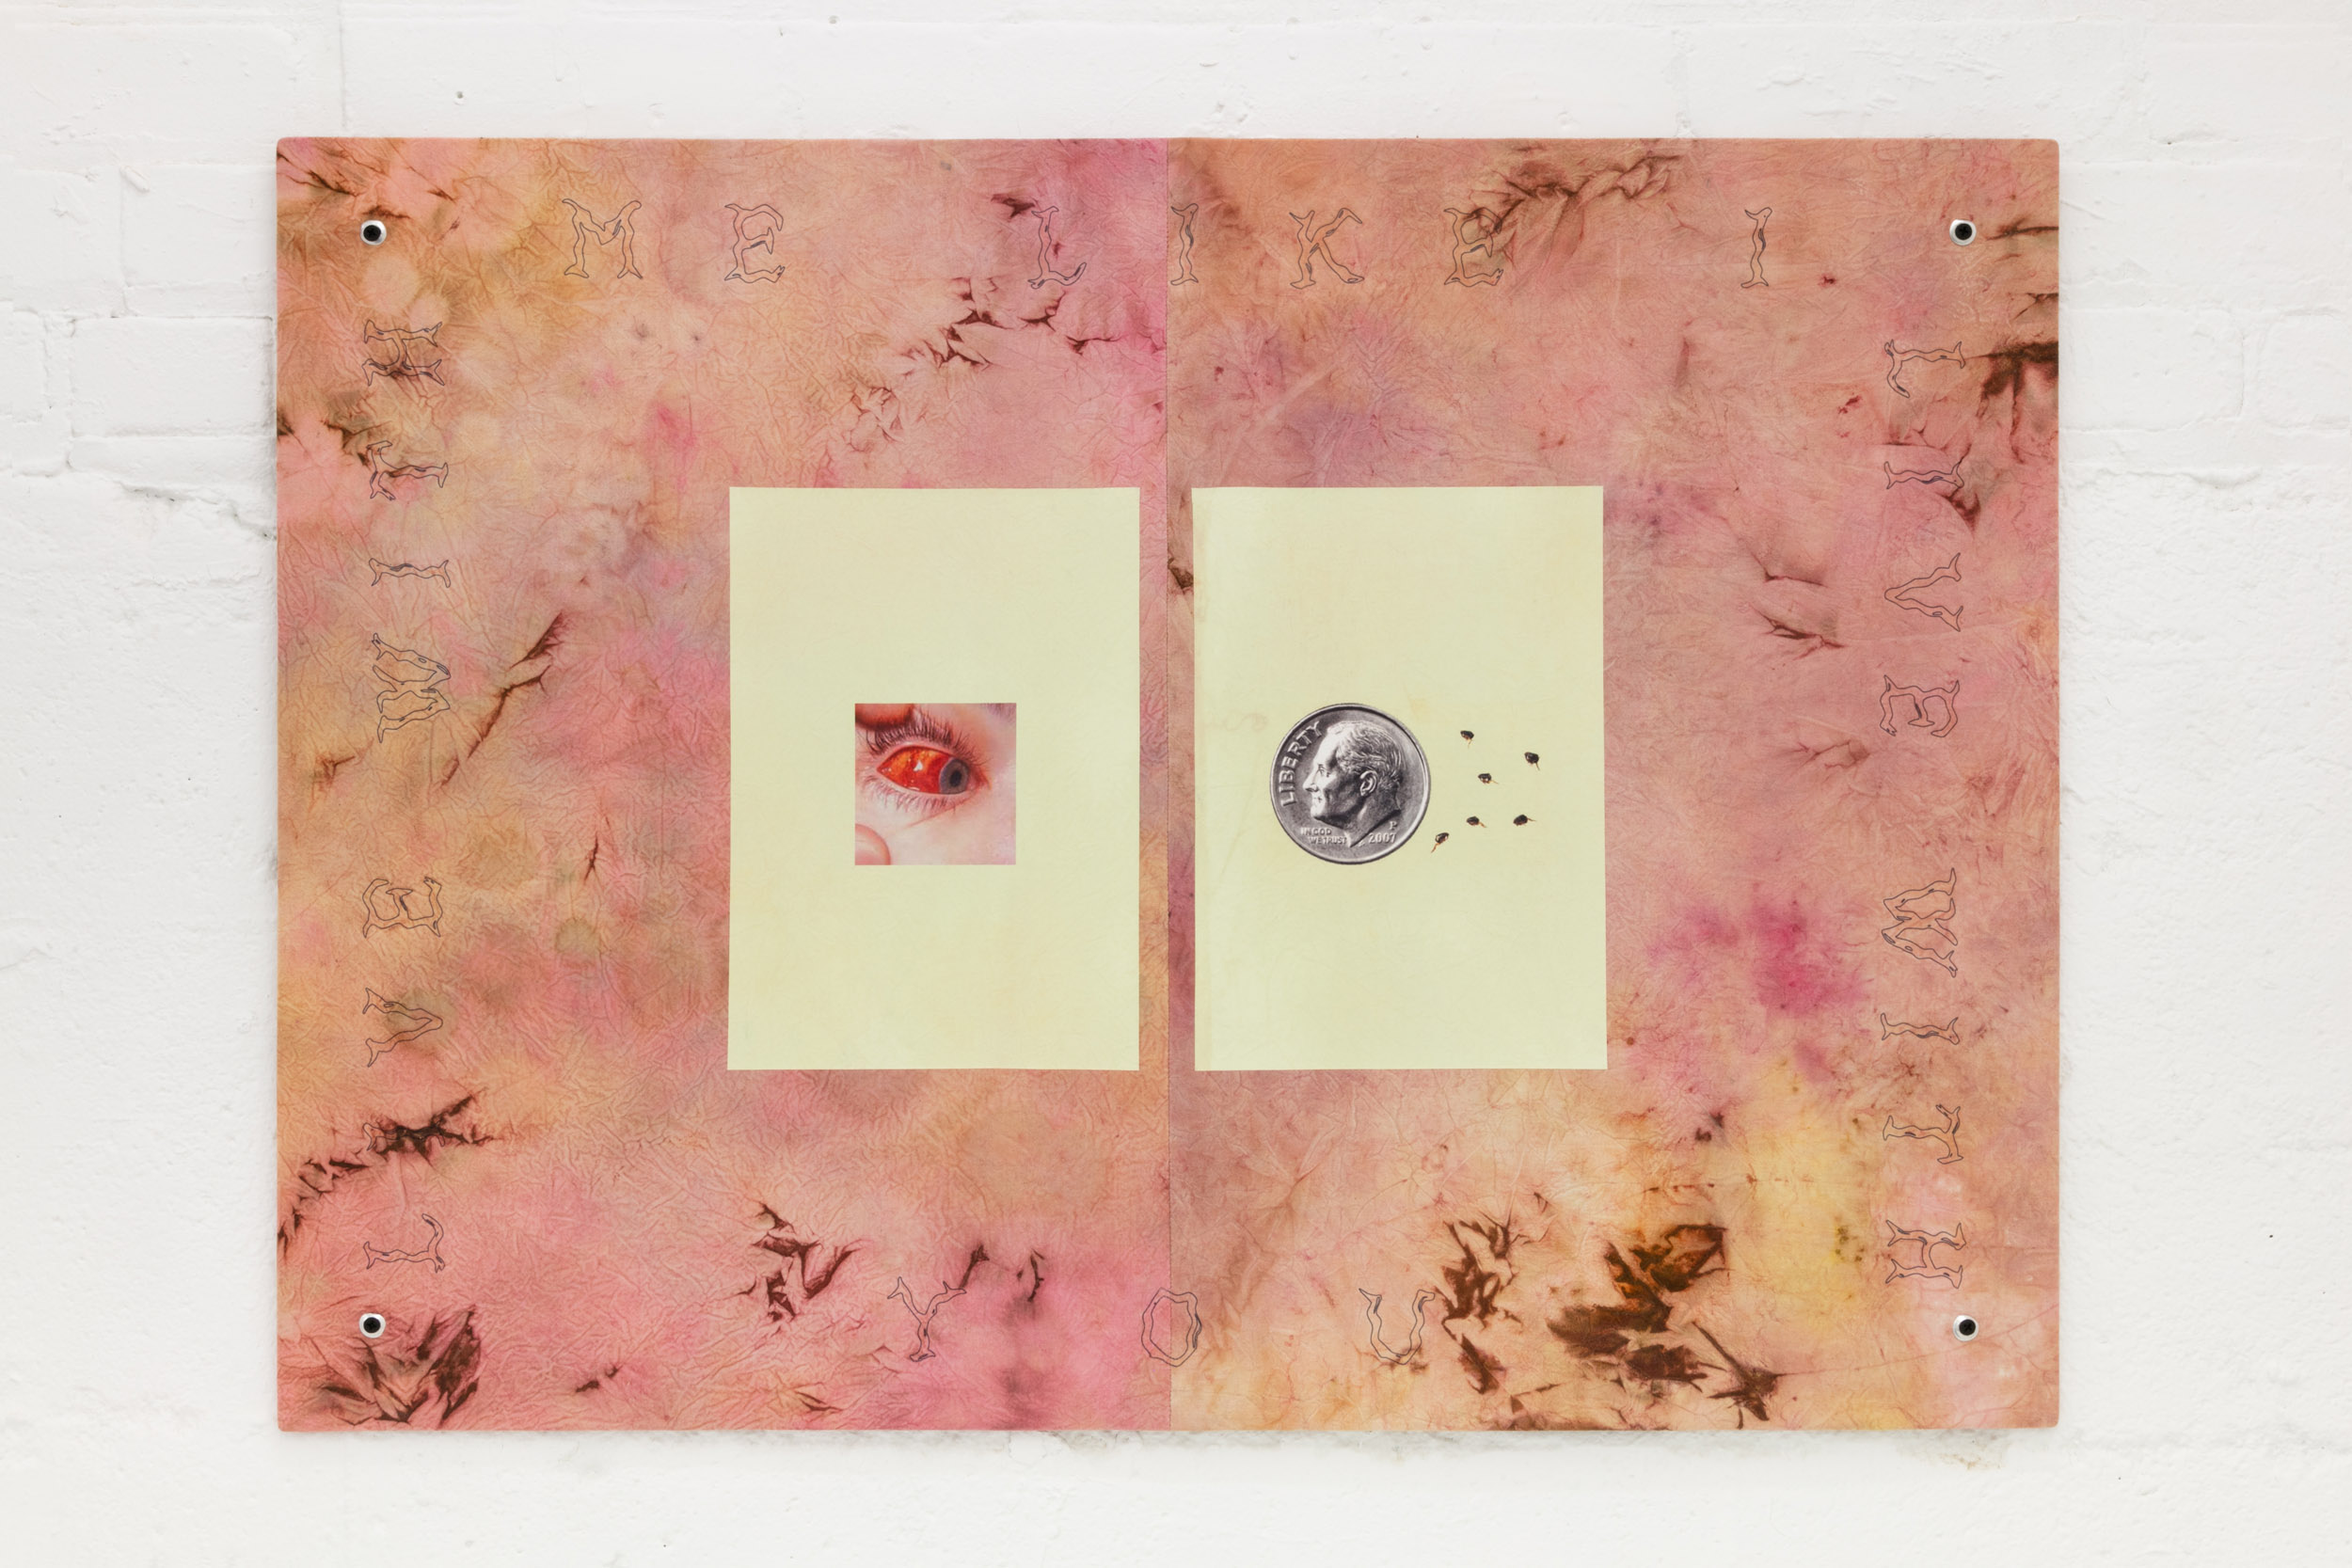  Elif Saydam,  Live with me like I live with you , 2019, Inkjet transfer, aluminium grommets on dyed canvas, mounted on poplar board 